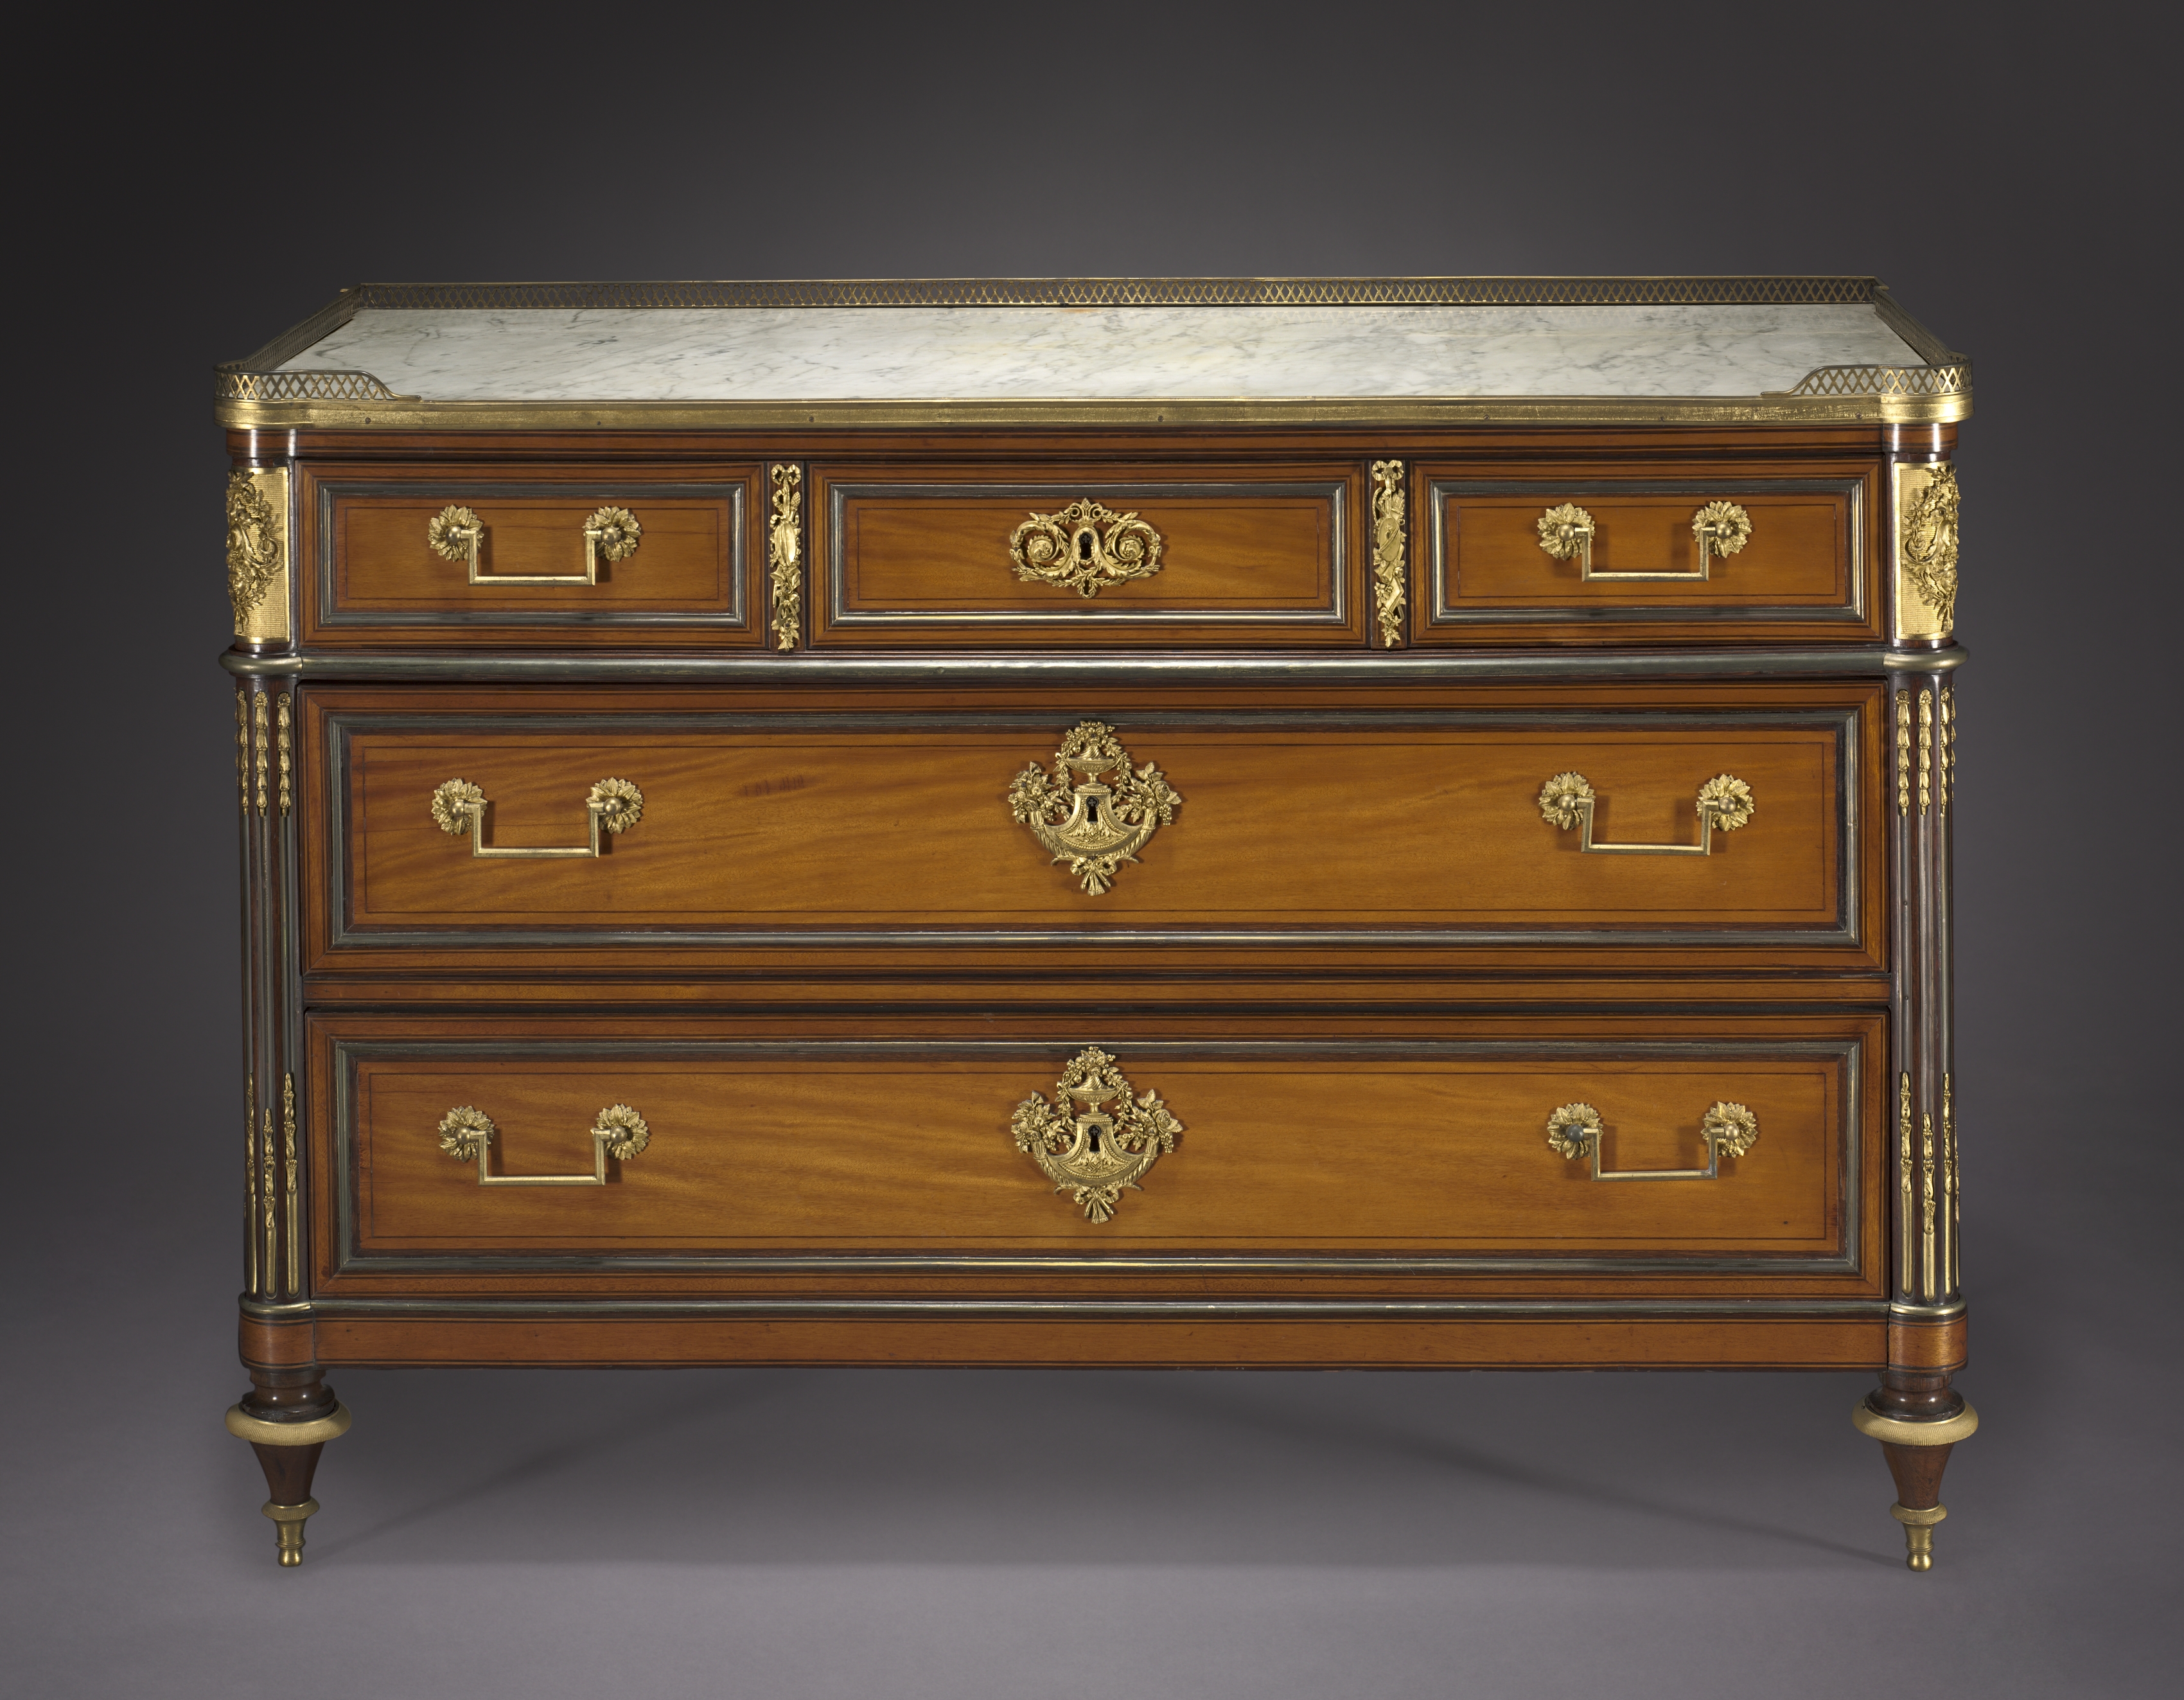 Chest of Drawers (Commode)